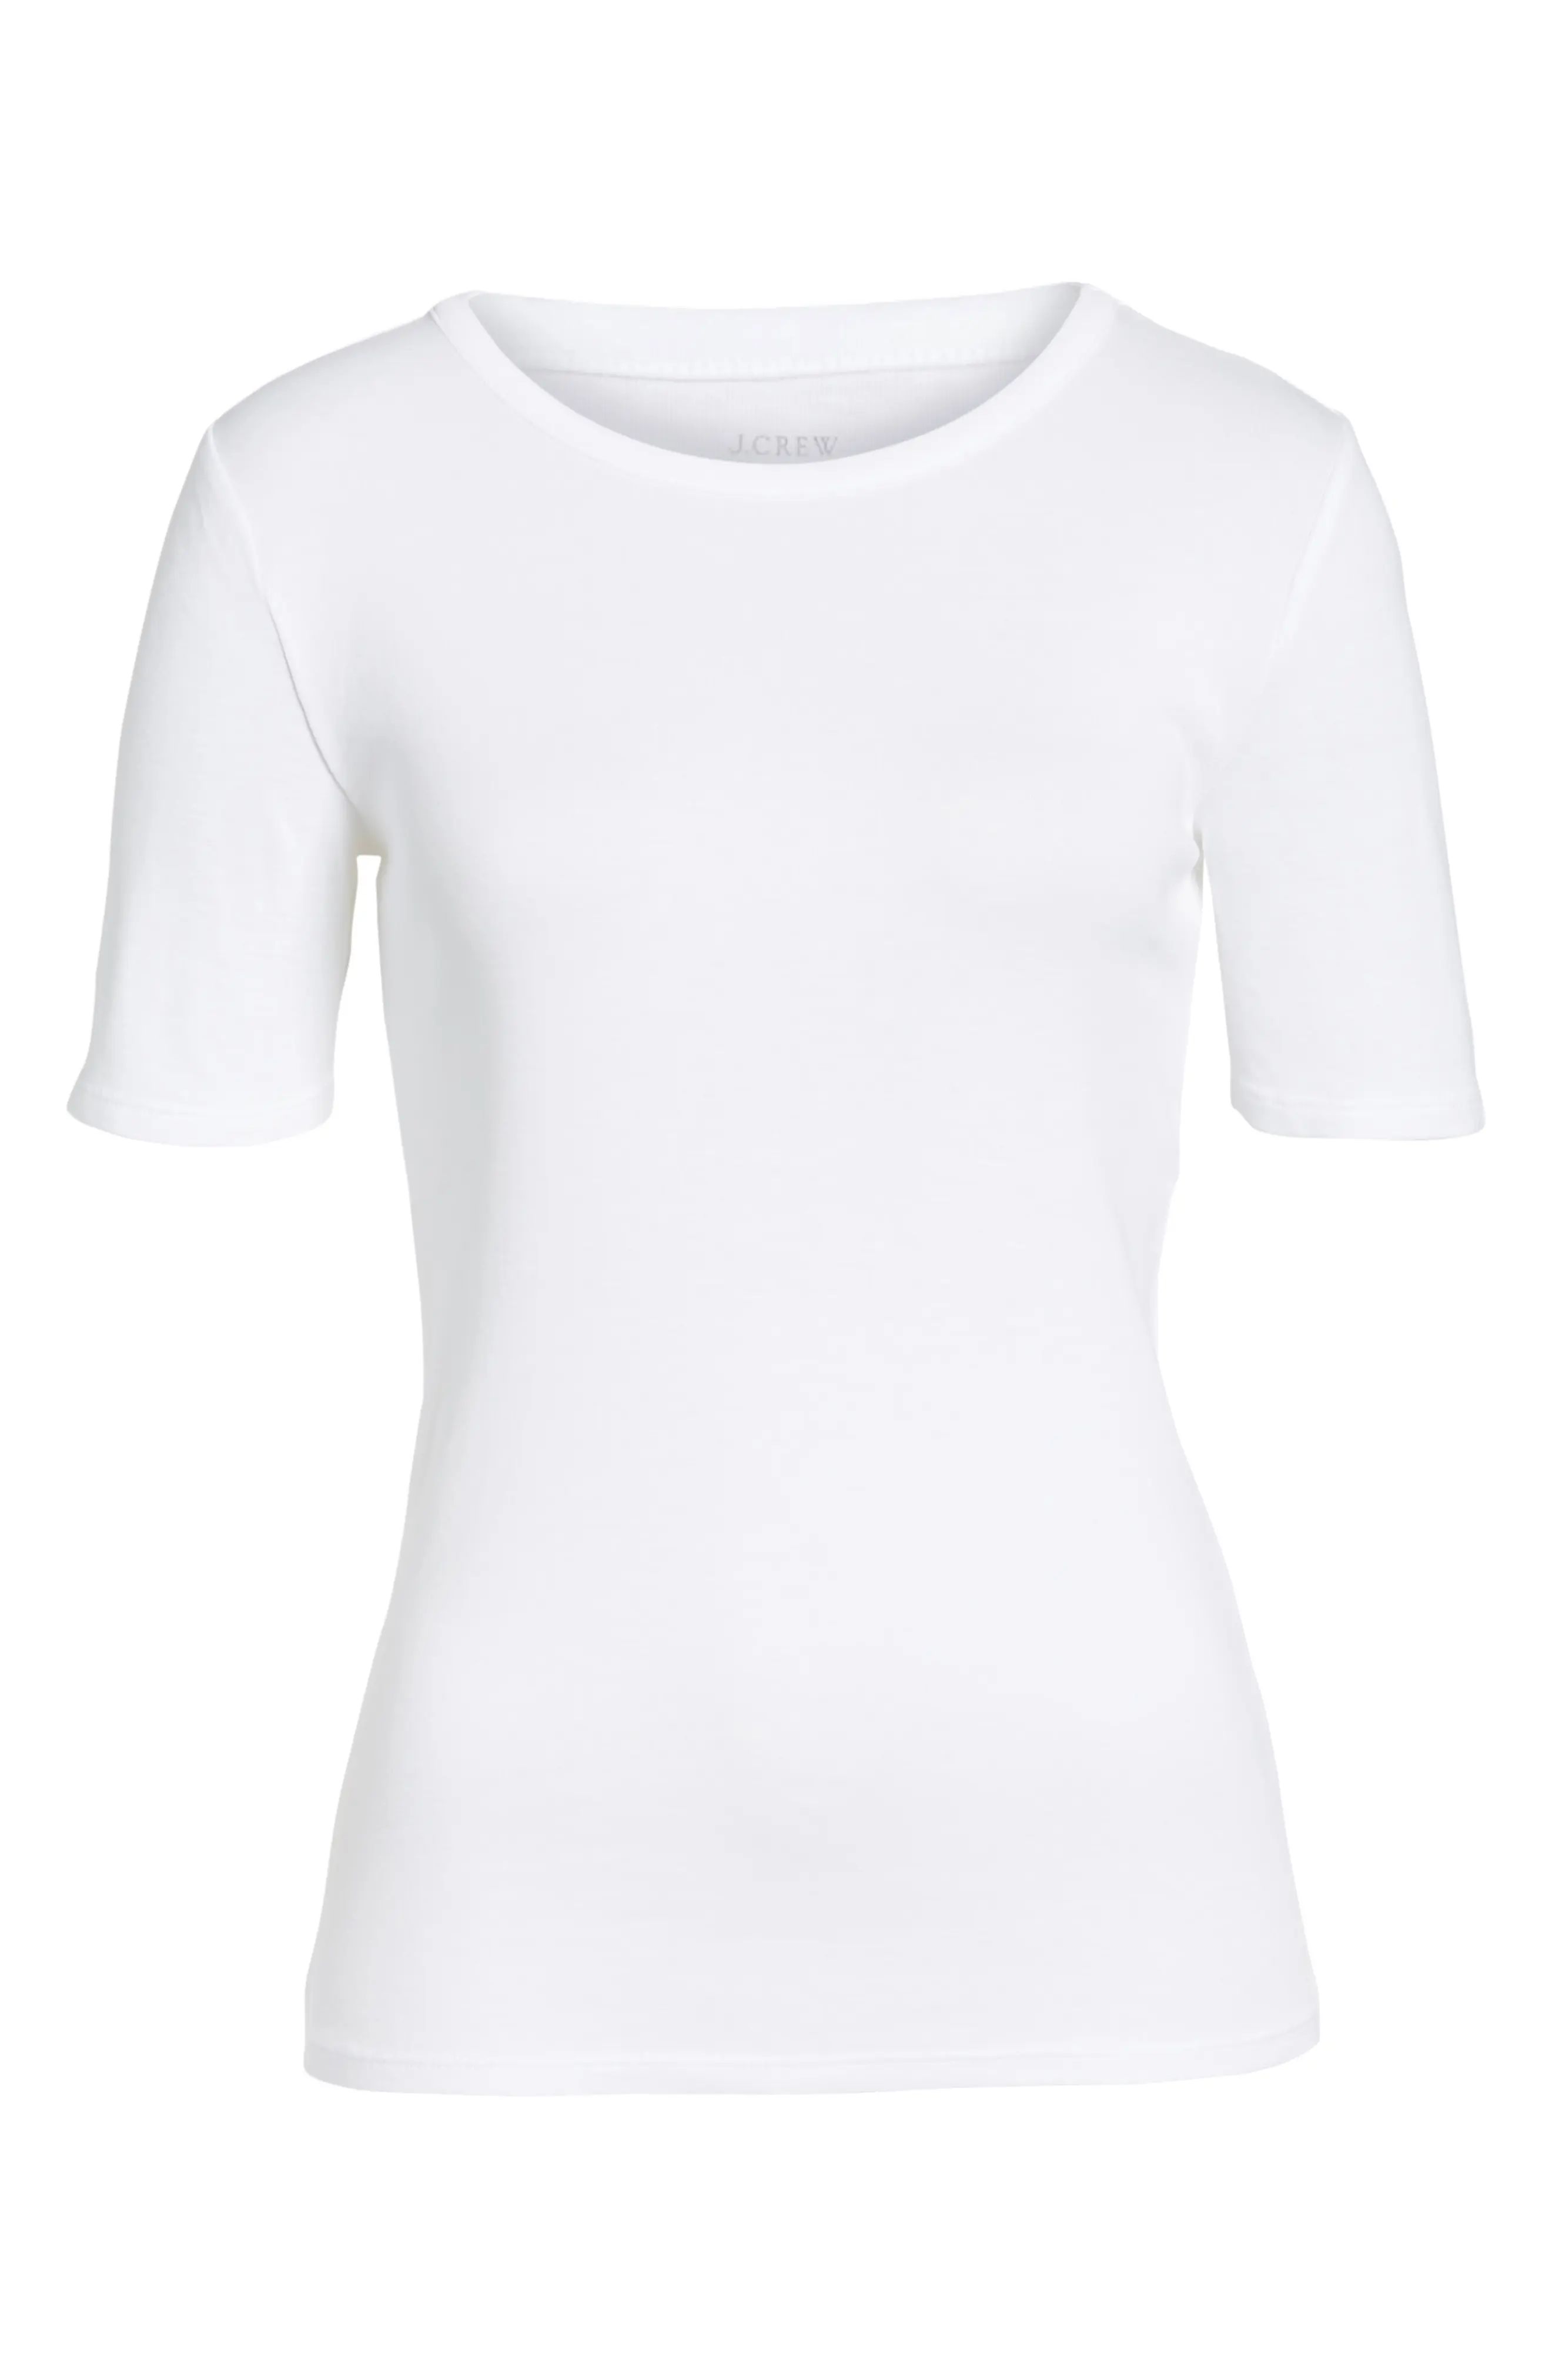 Women's J.crew New Perfect Fit Tee, Size XX-Small - White | Nordstrom